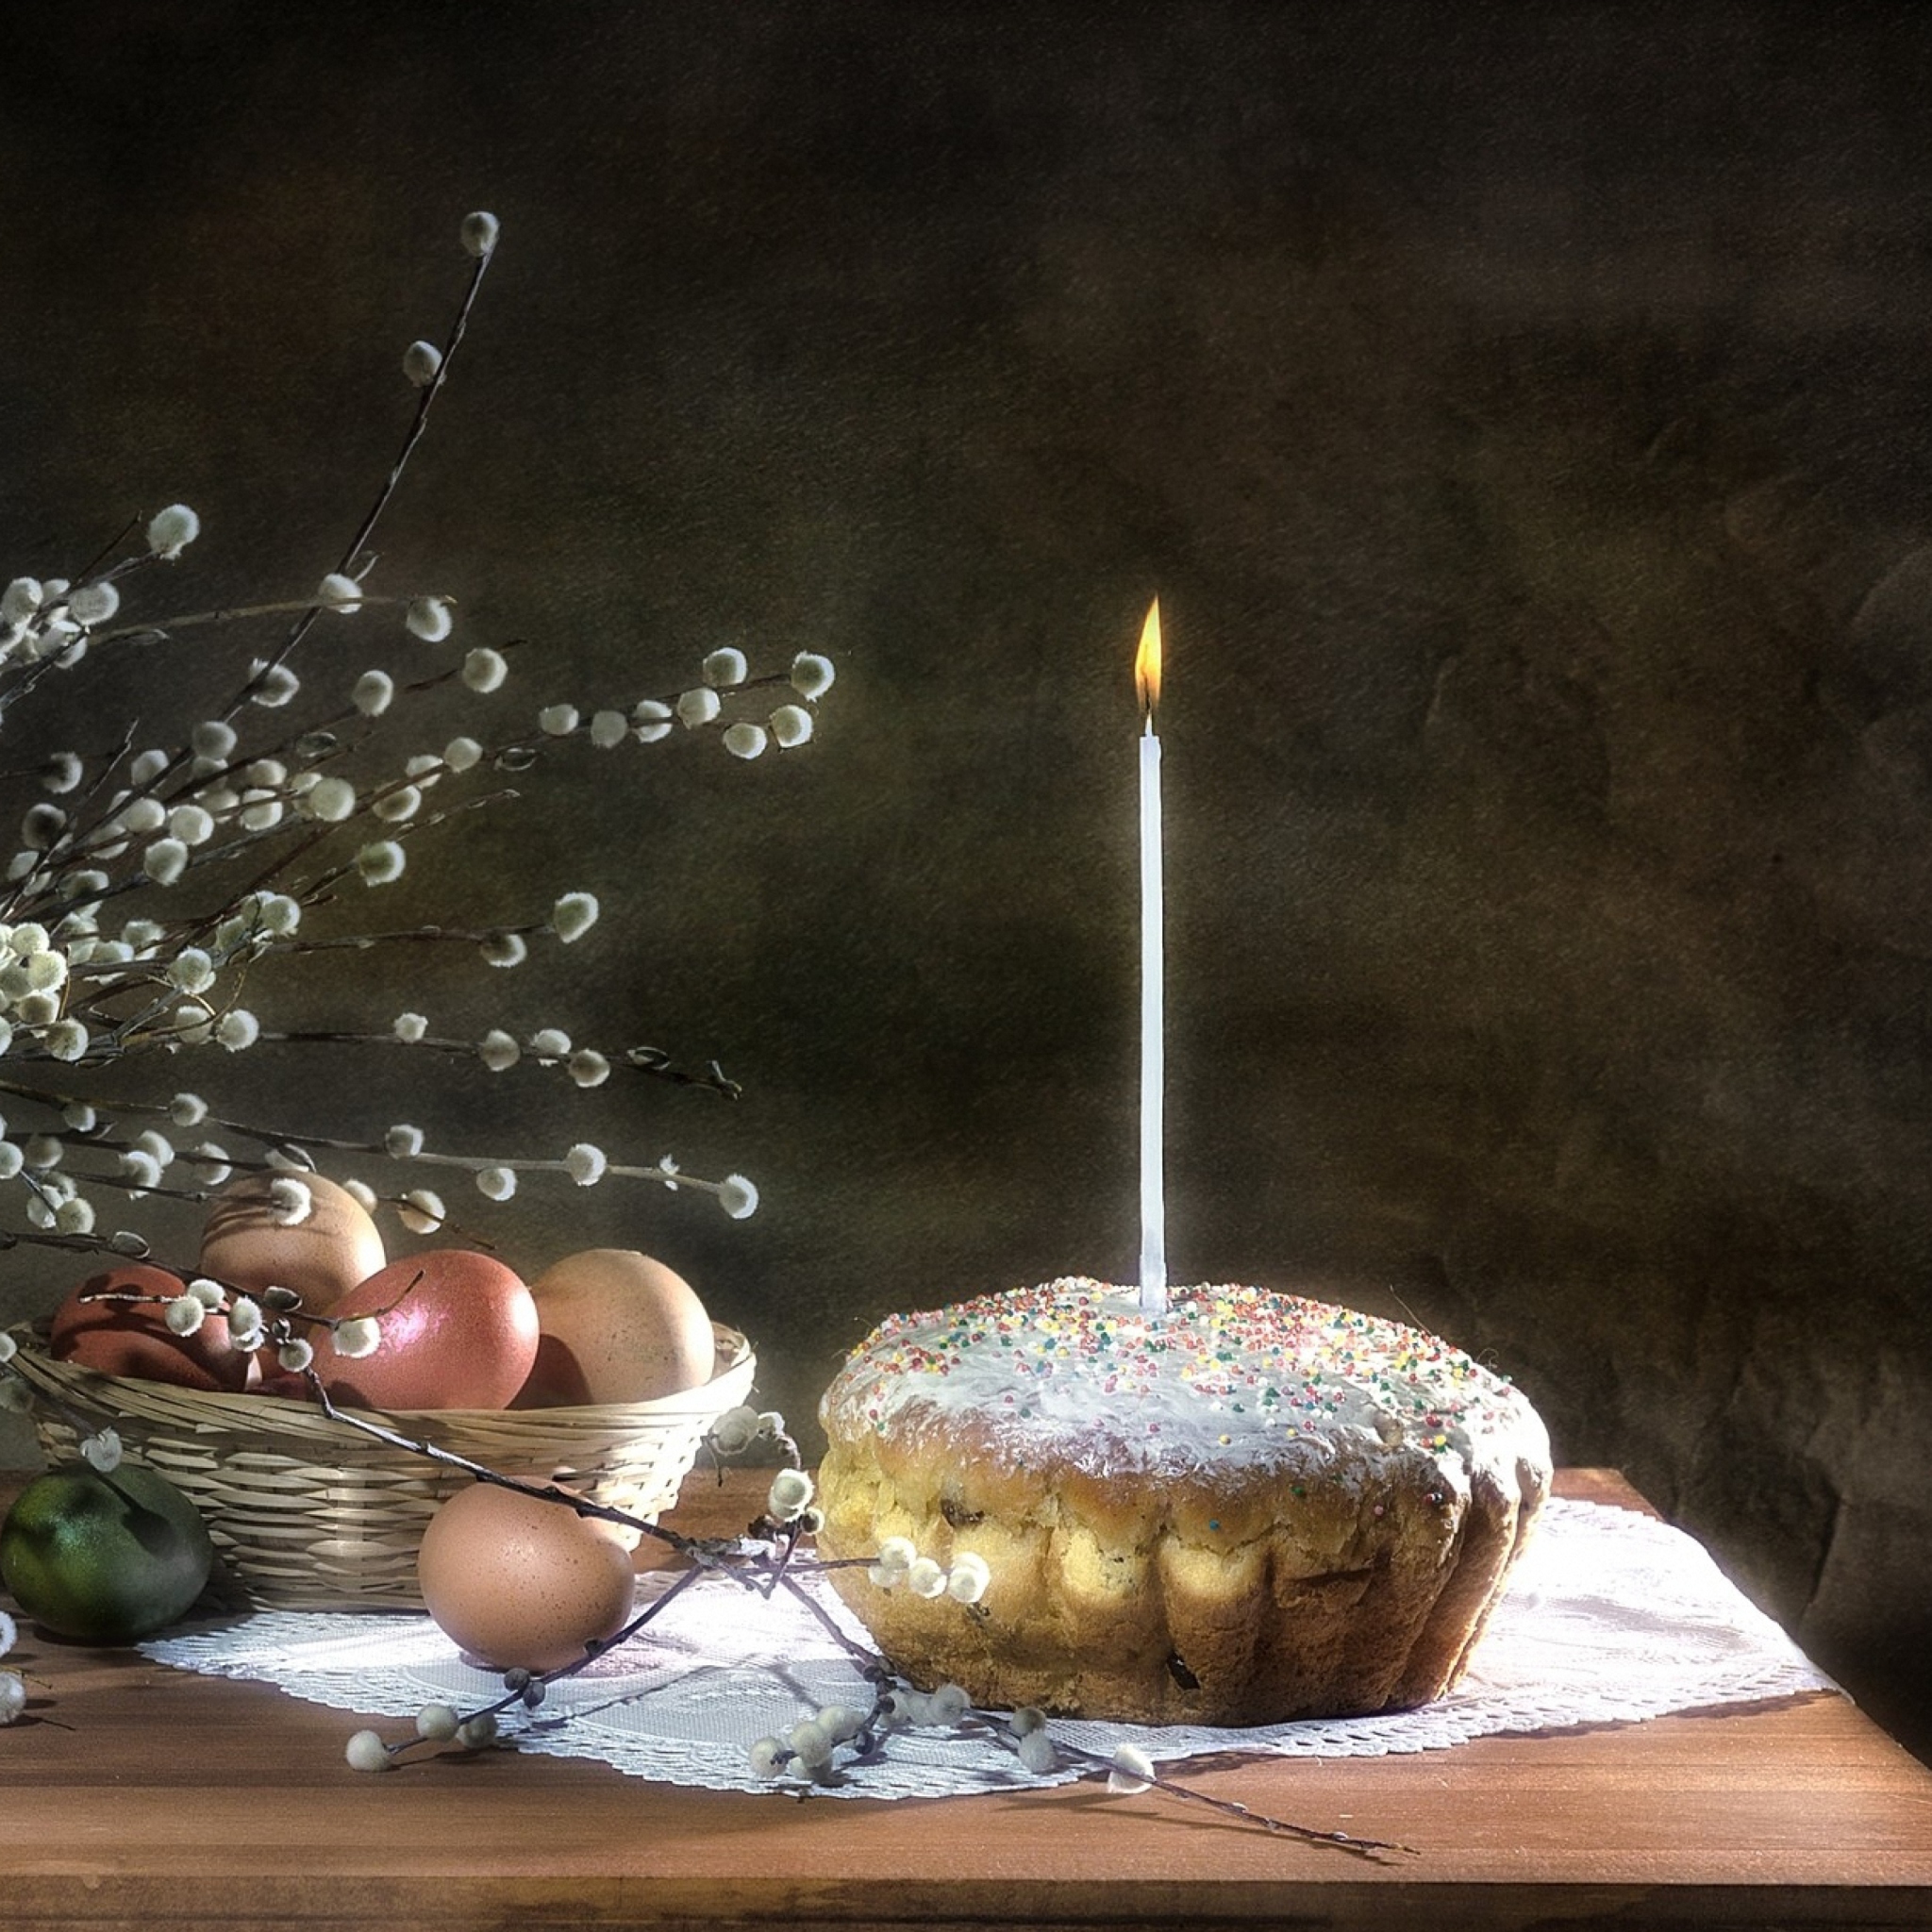 Easter Cake With Candle wallpaper 2048x2048